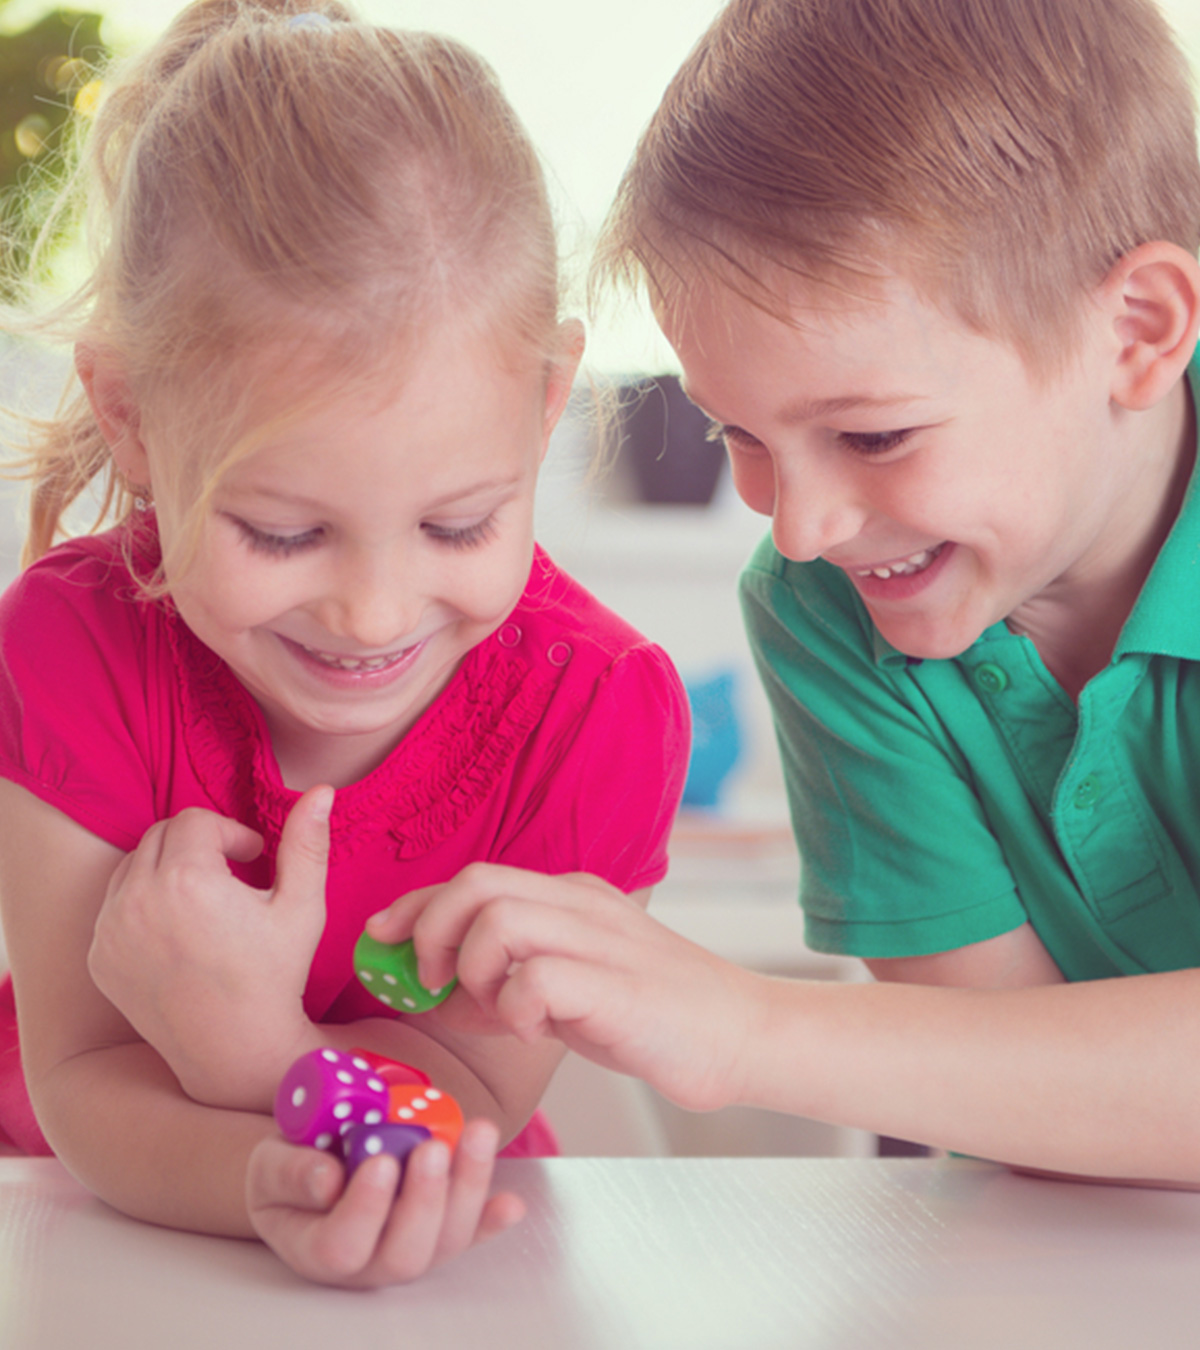 15 Easy Yet Fun Dice Games For Children To Play